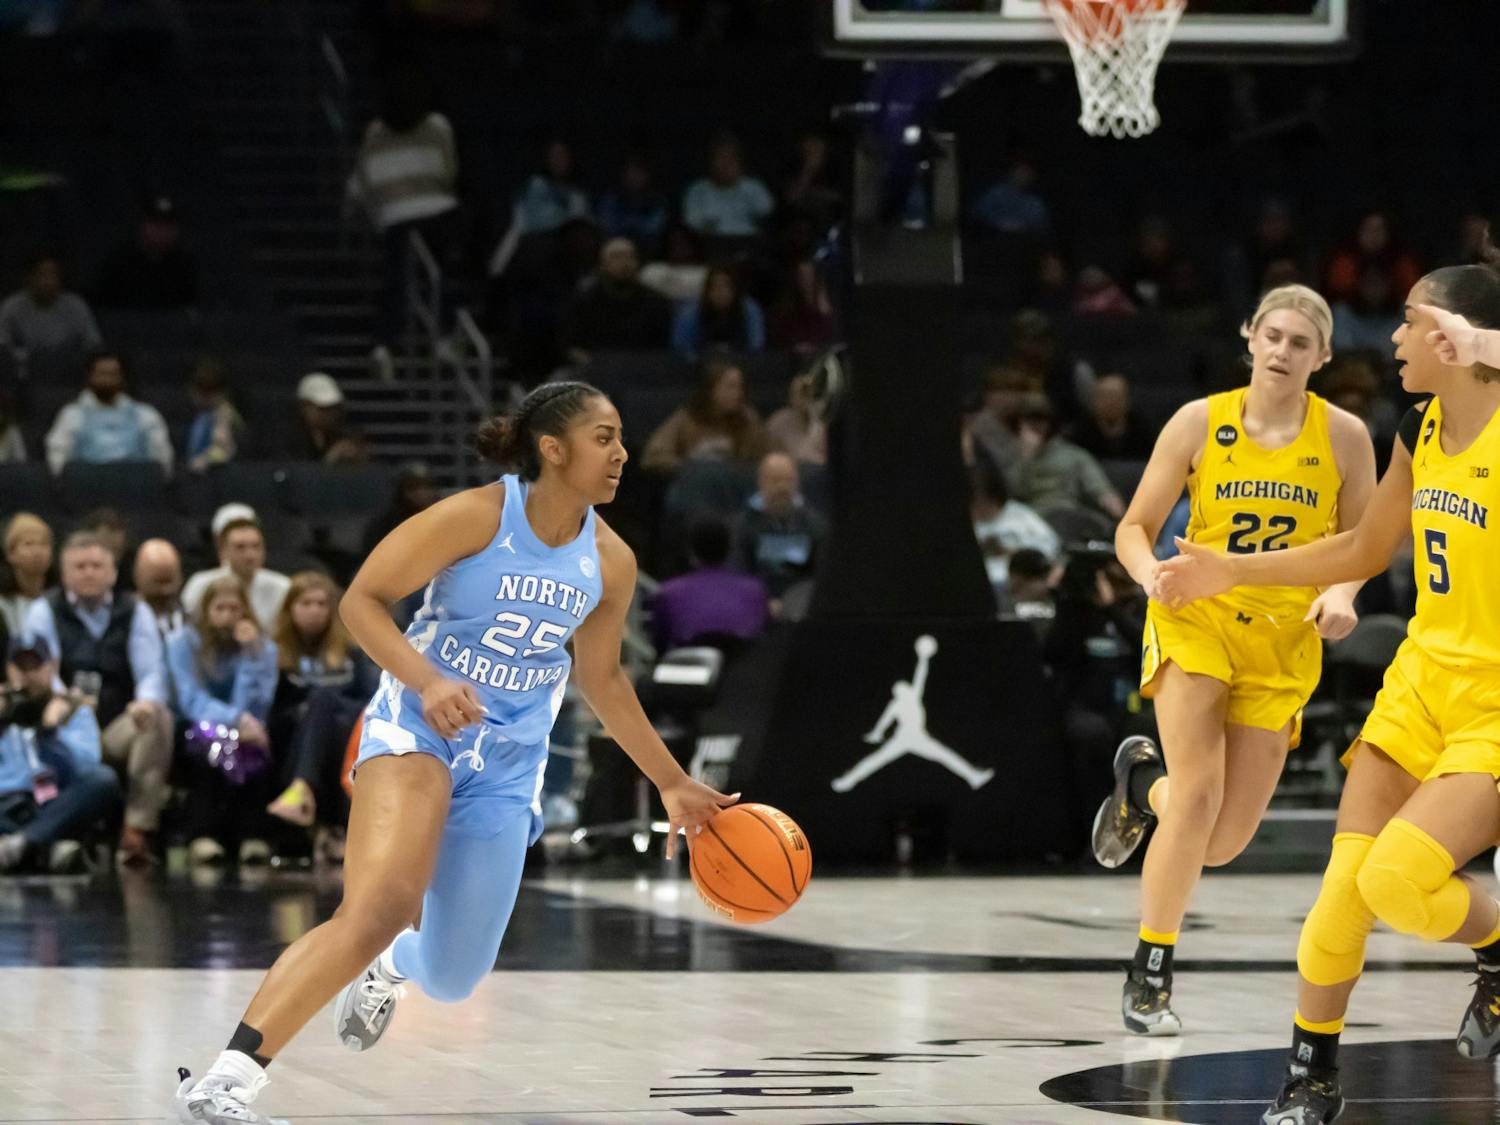 UNC junior guard, Deja Kelly (25), prepares to drive towards the basket during the against Michigan at the Spectrum Center in Charlotte, N.C., on Tuesday, Dec. 20, 2022. UNC fell to Michigan 76-68.